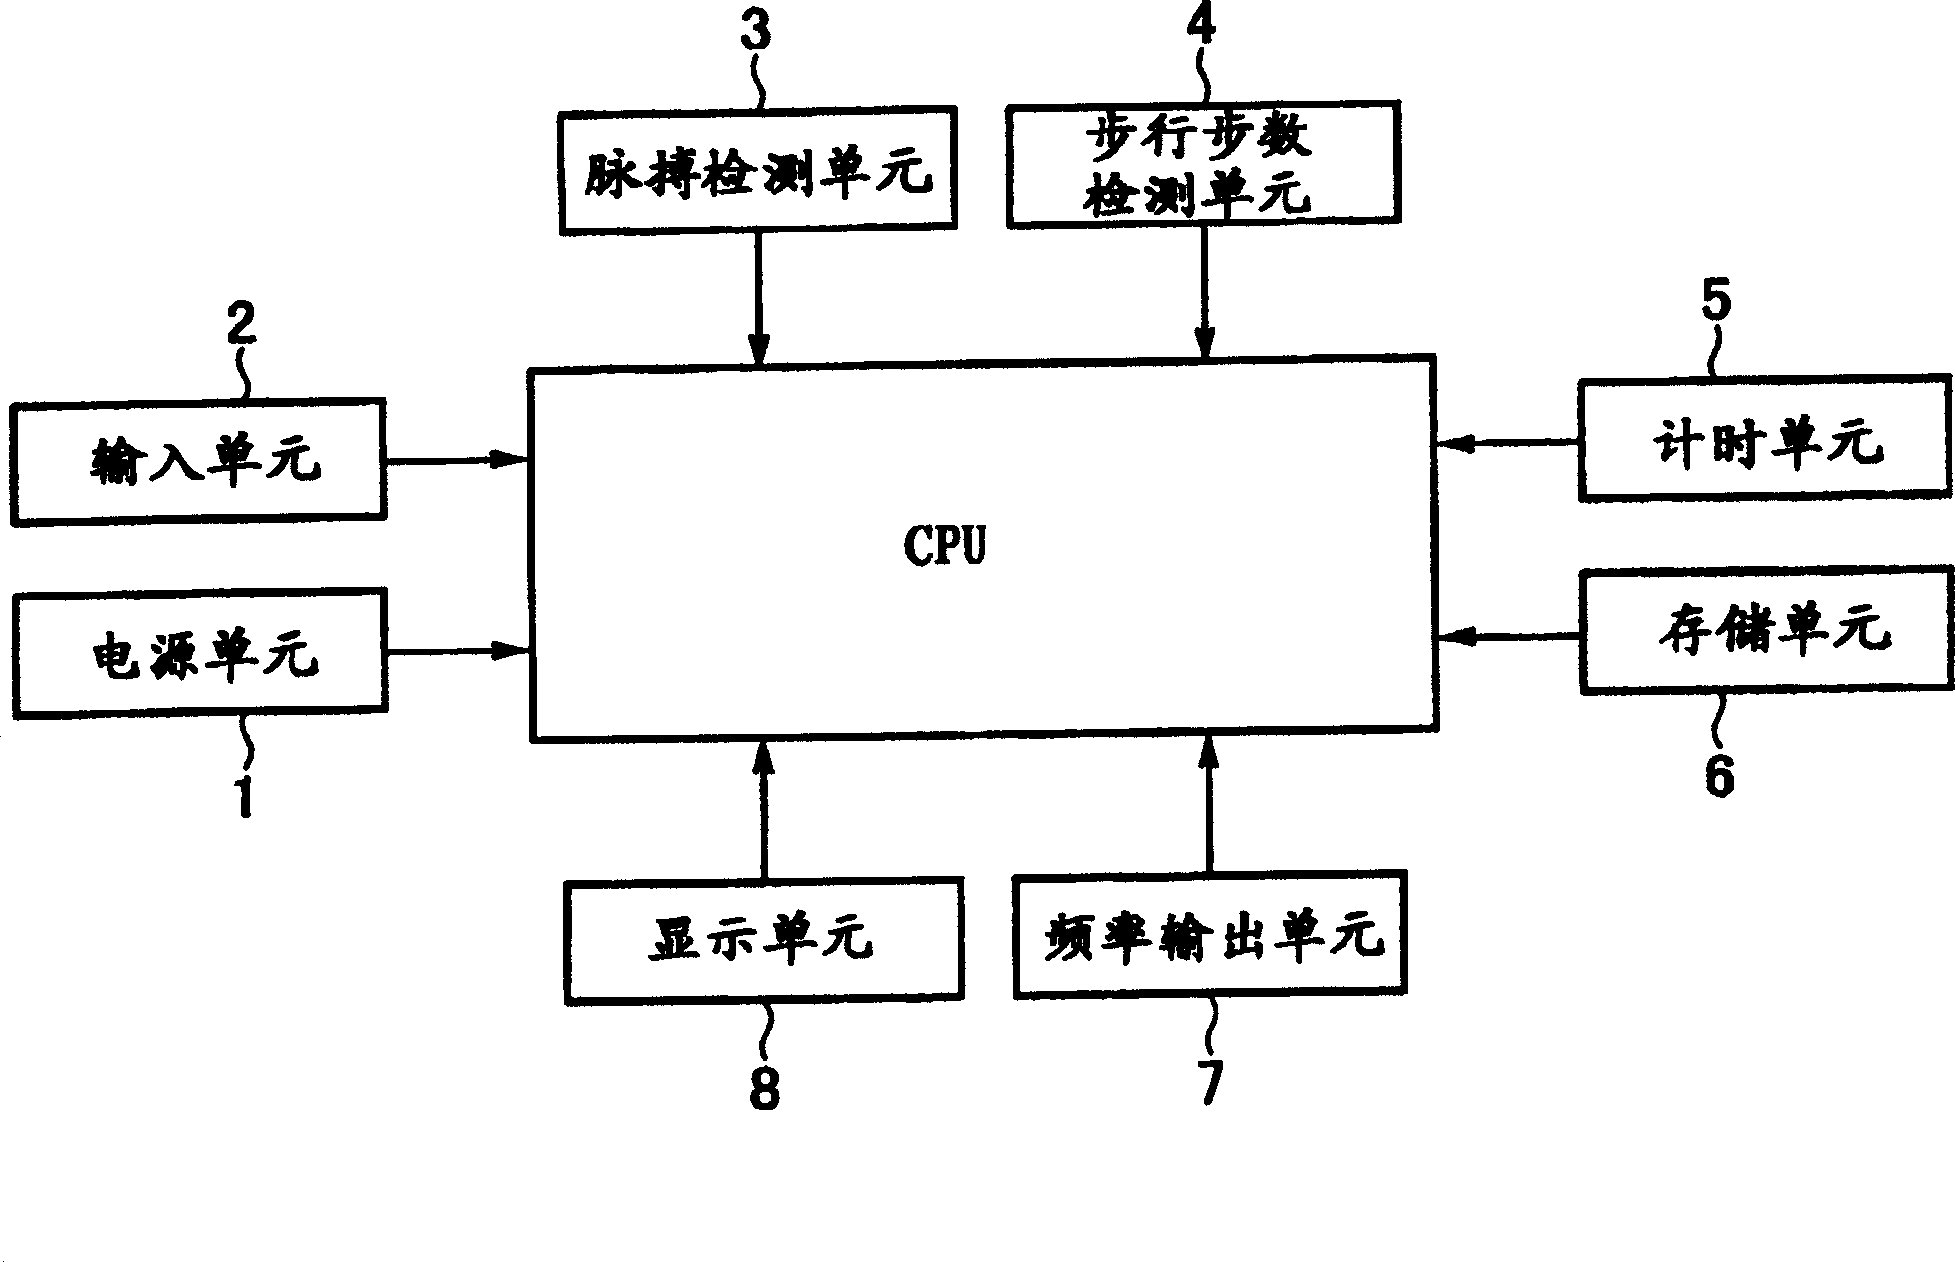 System for computing biological data for walk and walk frequency meter